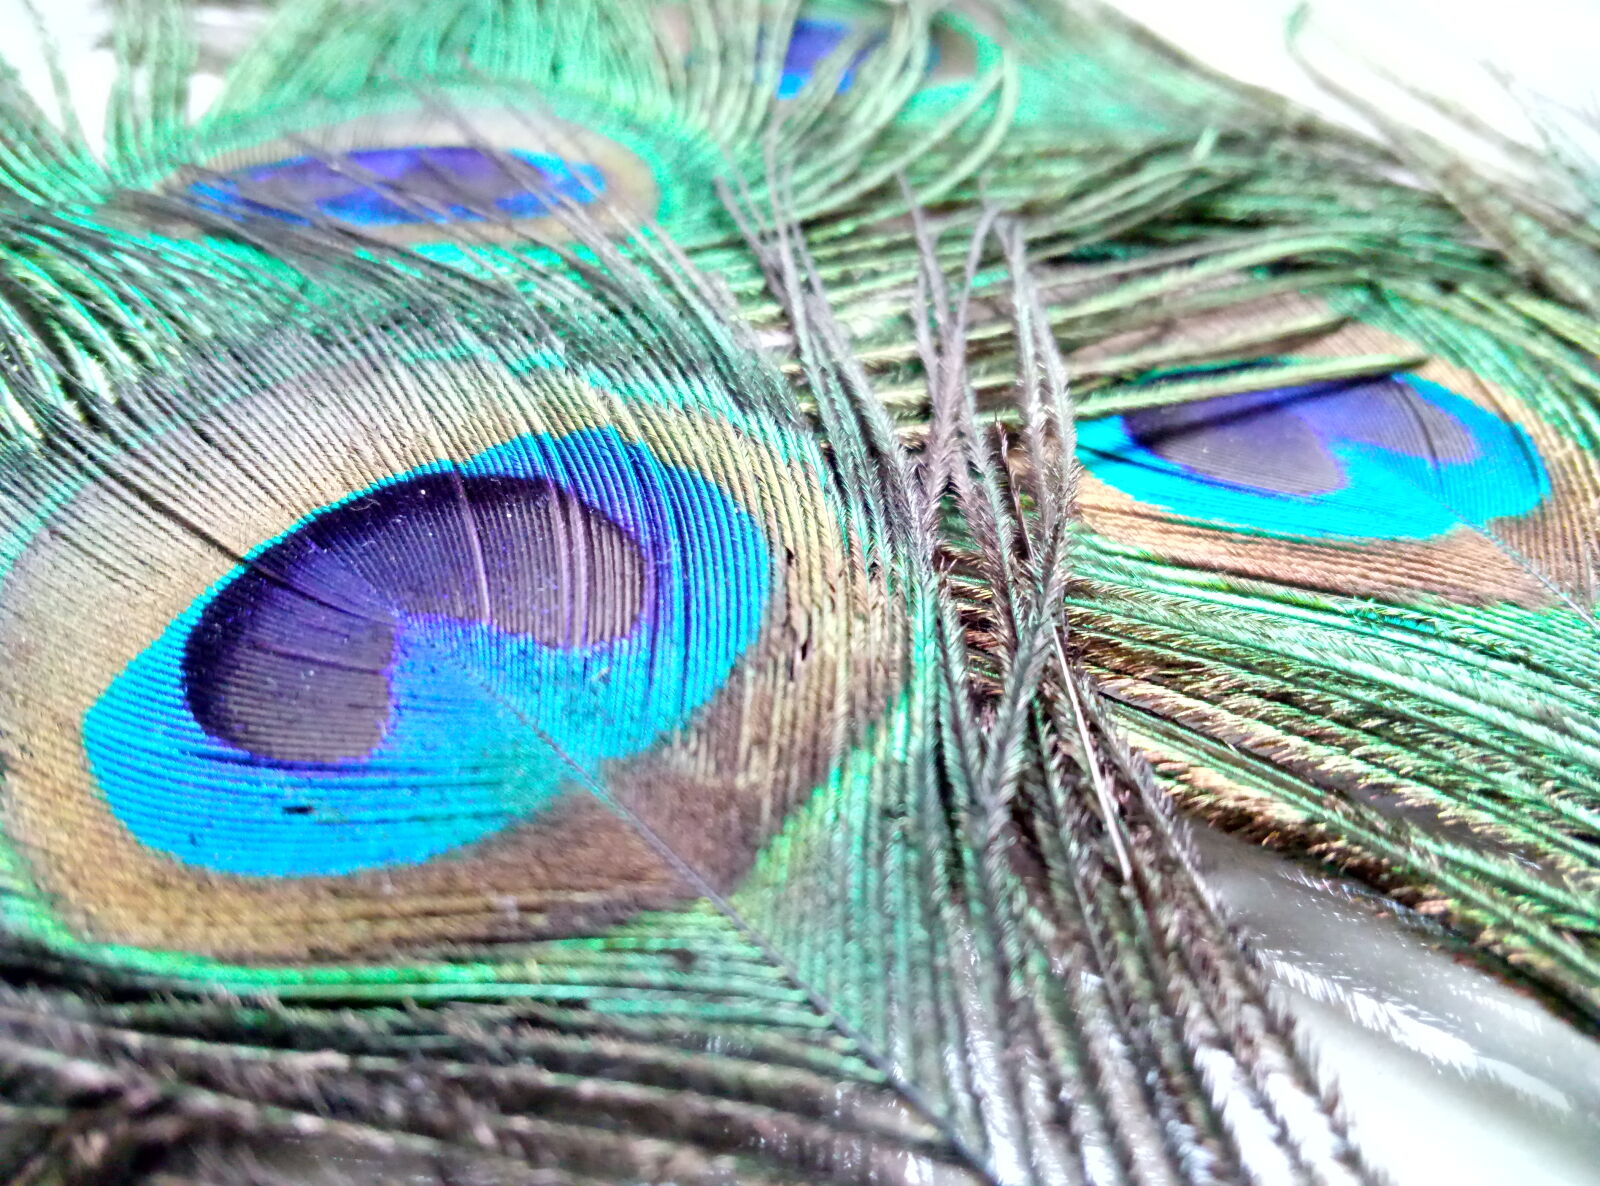 Meizu m3 note sample photo. Colorful, feather, feathers, peacock photography